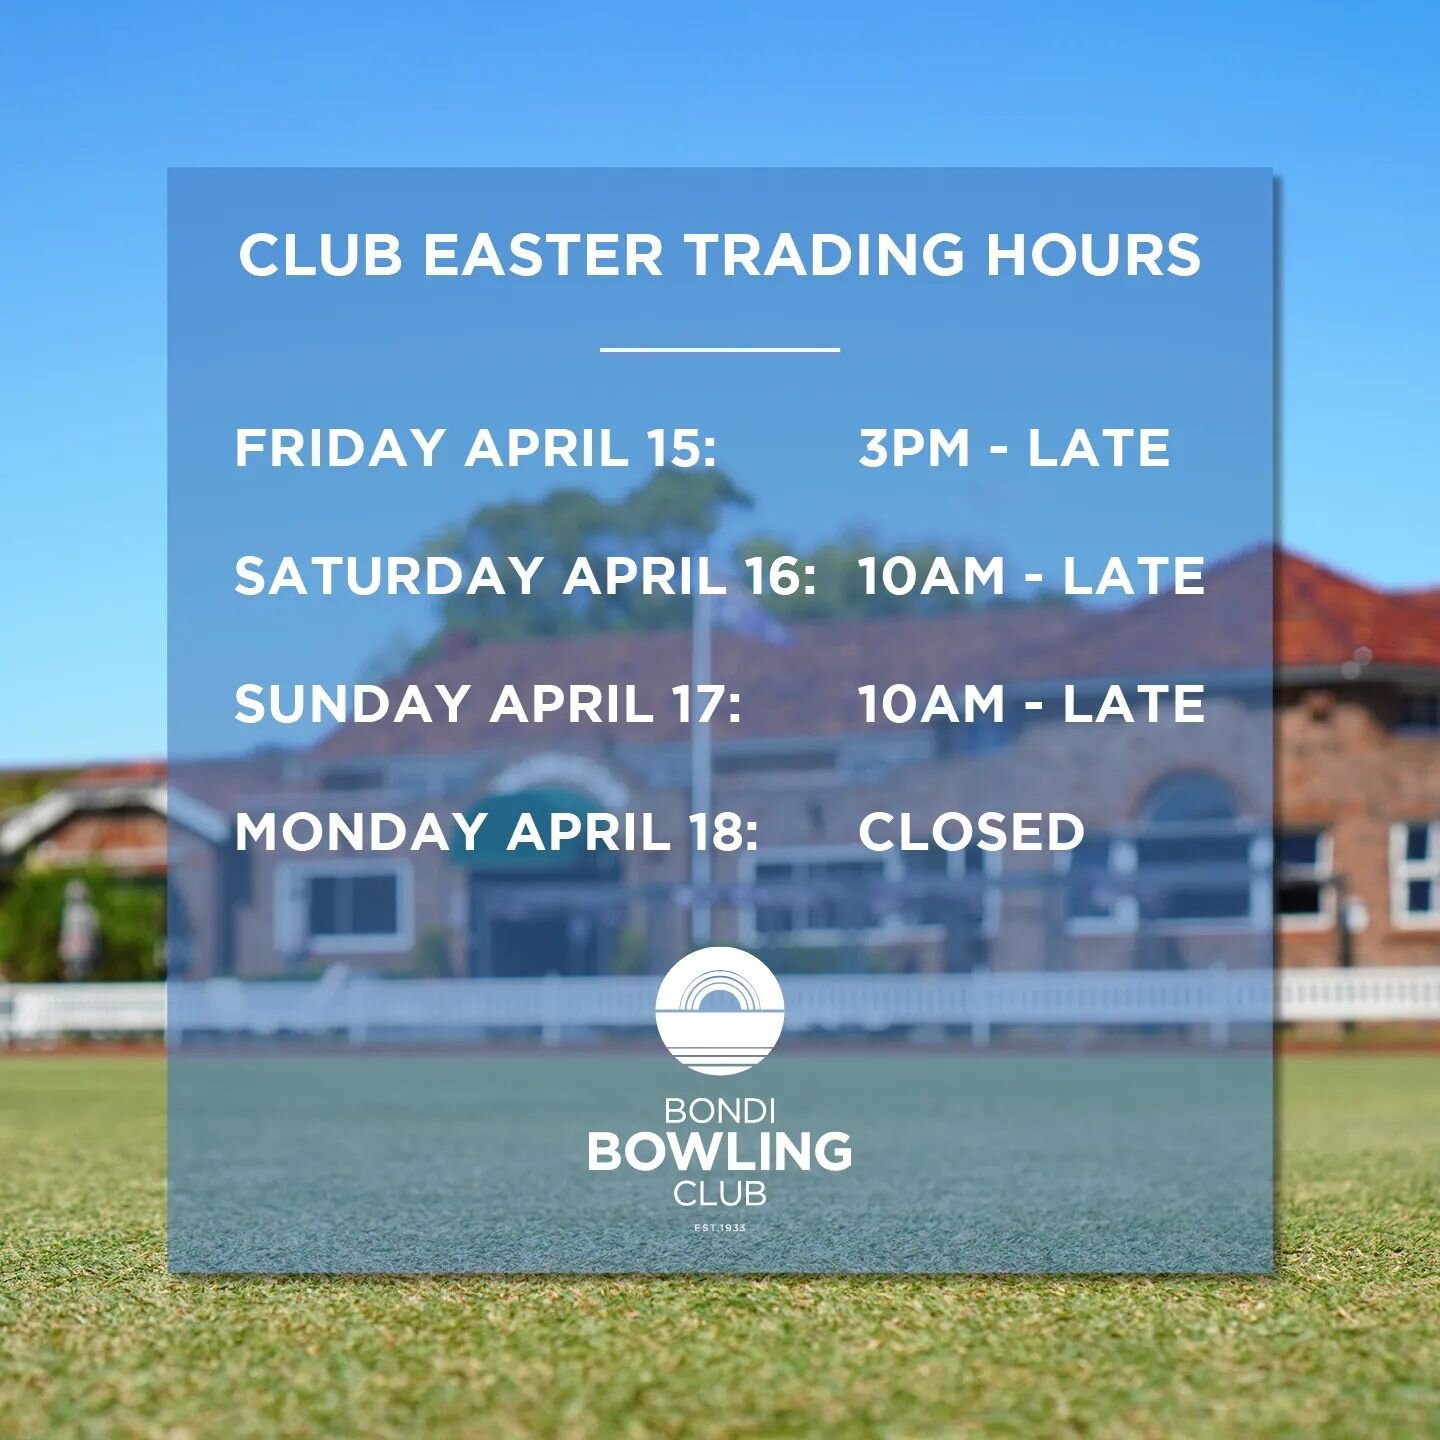 We're open as per usual this Easter weekend, so why not hop down for a few bowls, beers and bites? 🍺🐰